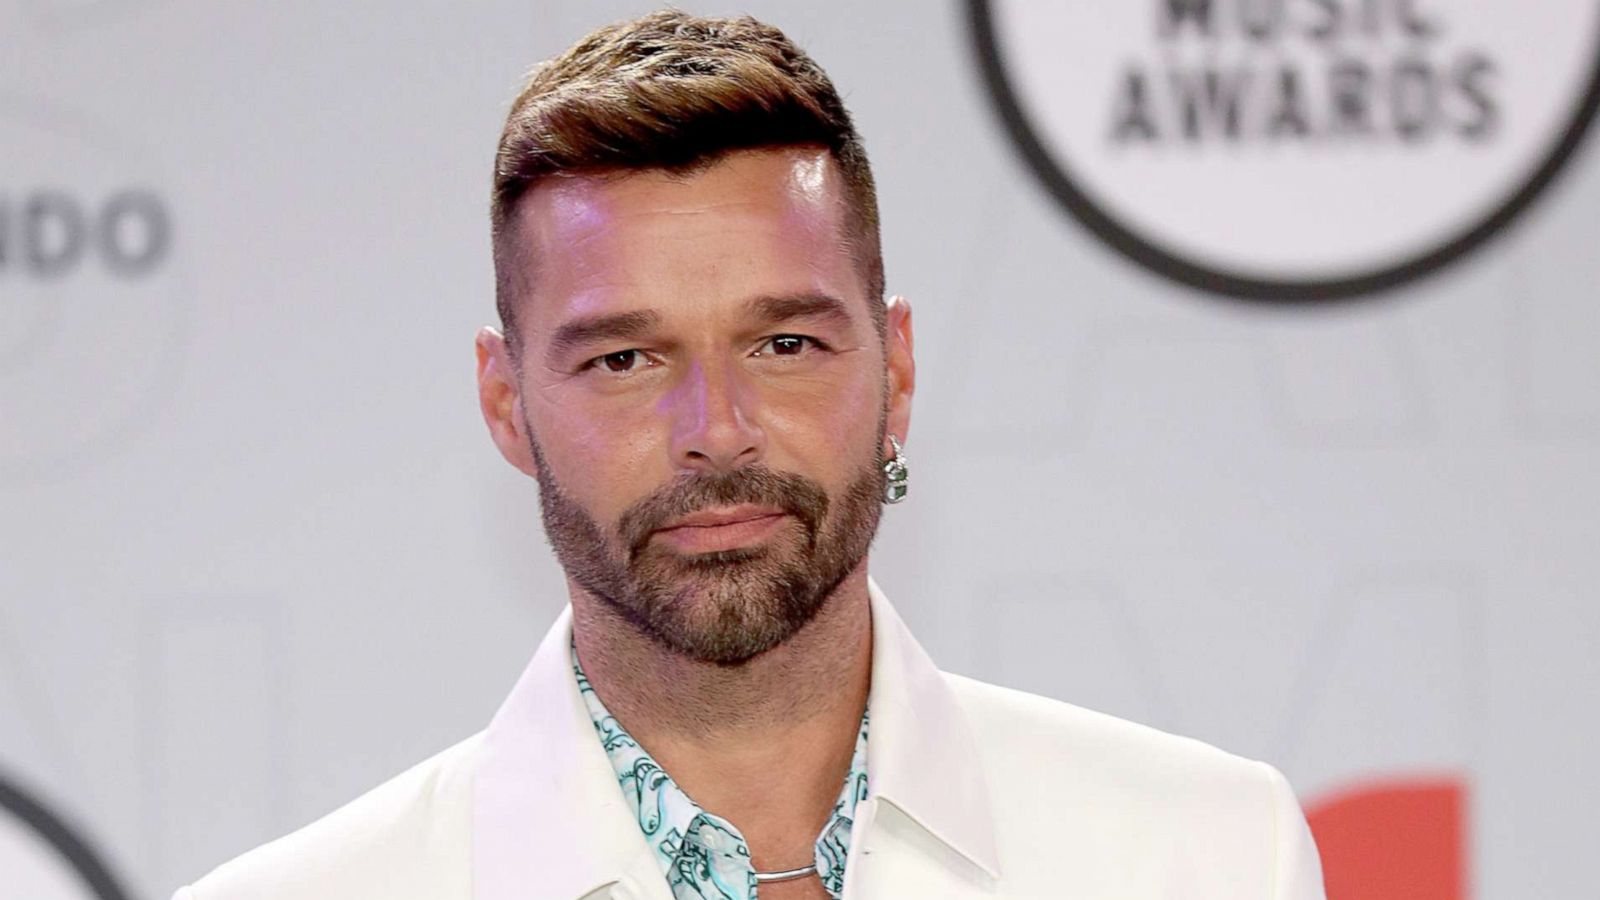 Ricky Martin Sex Porn - Ricky Martin reflects on not being ready to come out as gay, how 'amazing'  it felt when he did - Good Morning America